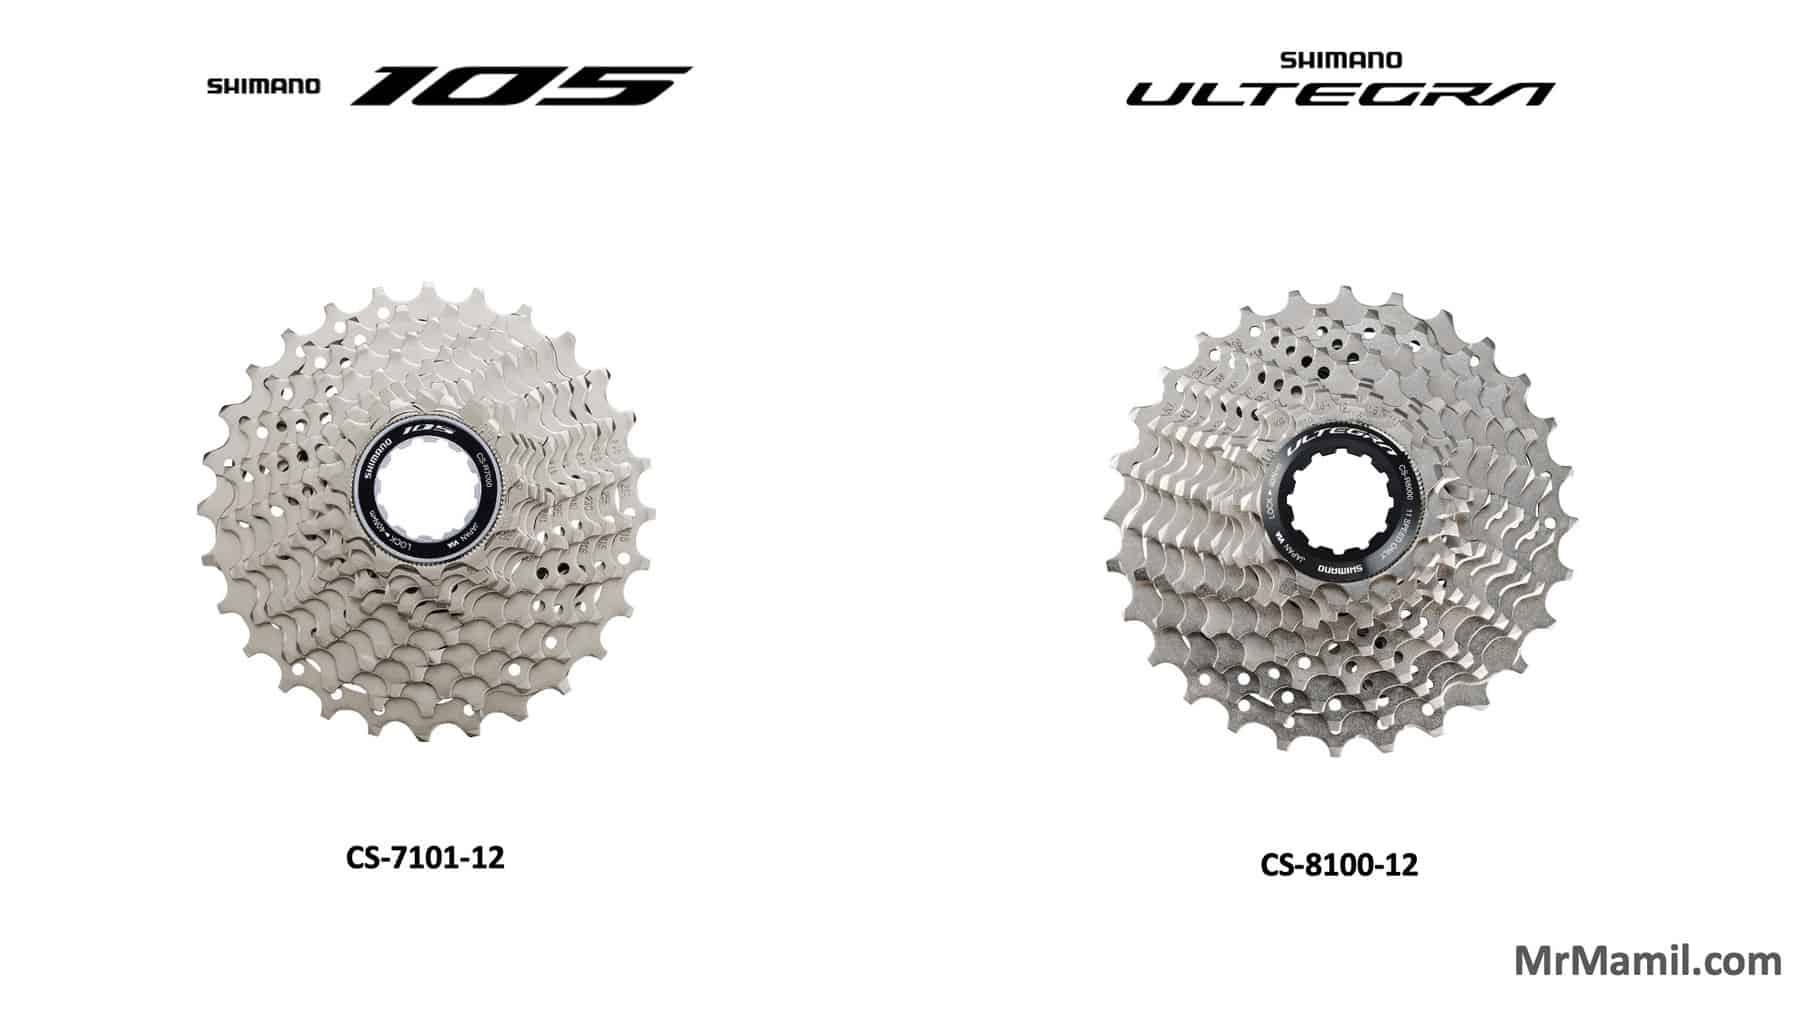 Side-by-side comparison of Shimano 12-speed bicycle cassettes. On the left, a Shimano 105 cassette labeled CS-7101-12. On the right, a Shimano Ultegra cassette labeled CS-8100-12.